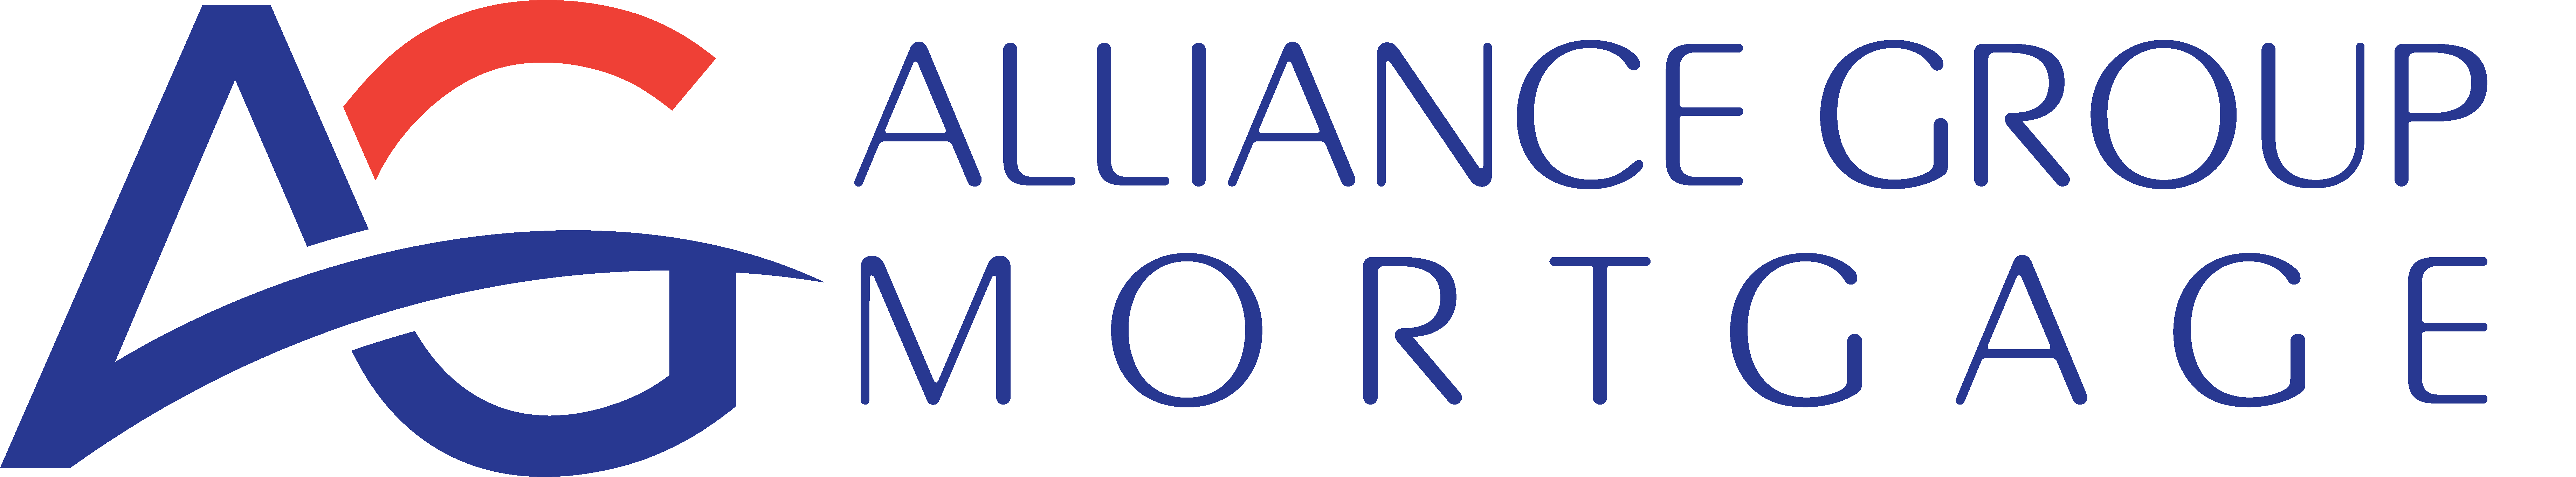 Alliance Group Mortgage